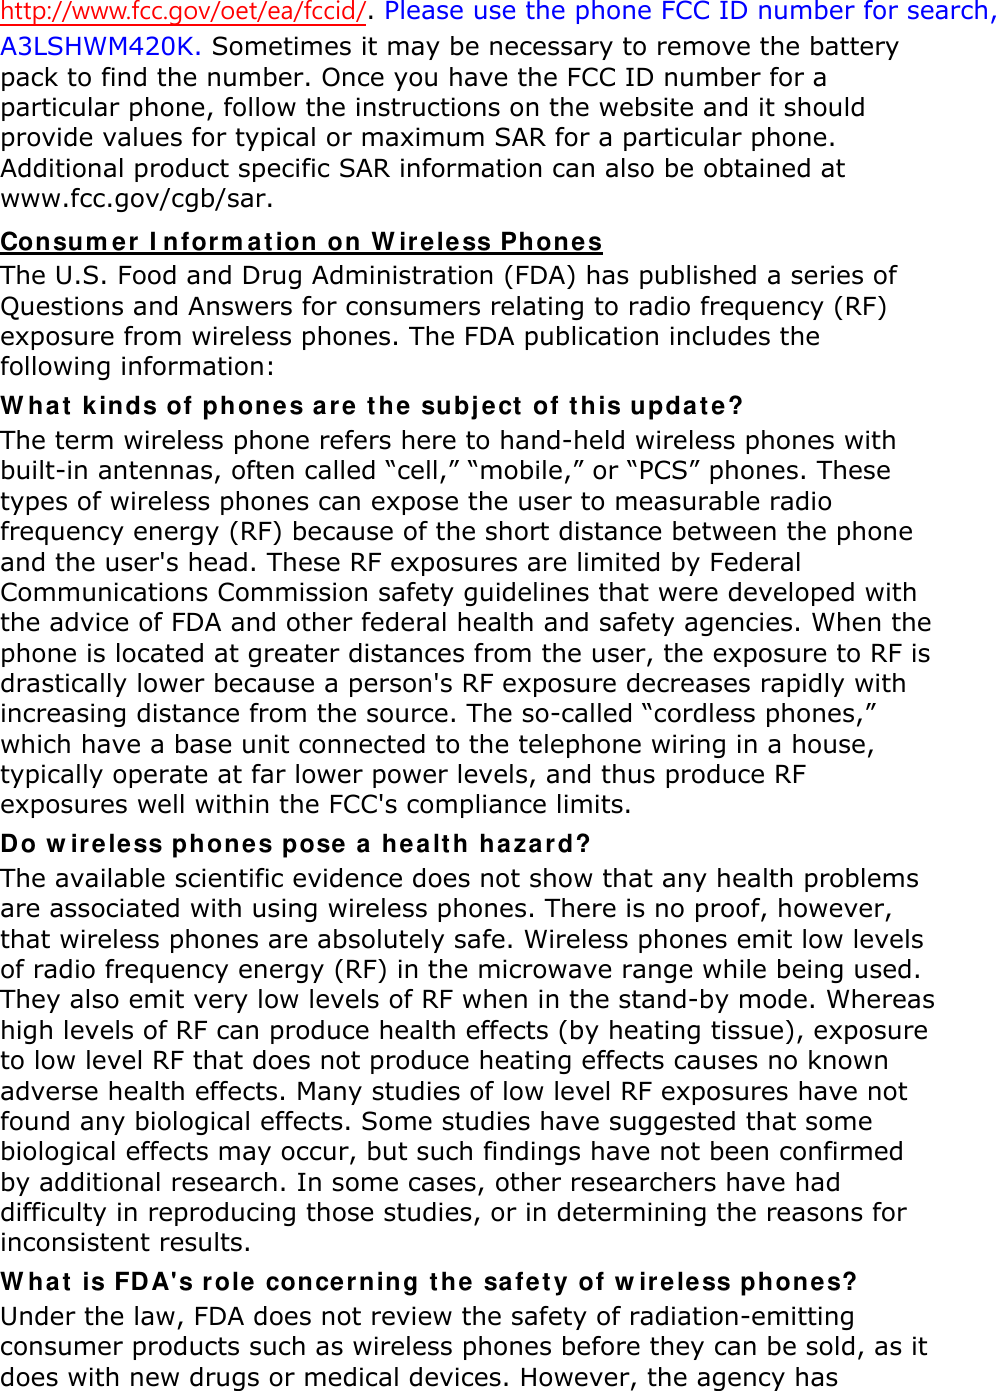 http://www.fcc.gov/oet/ea/fccid/. Please use the phone FCC ID number for search, A3LSHWM420K. Sometimes it may be necessary to remove the battery pack to find the number. Once you have the FCC ID number for a particular phone, follow the instructions on the website and it should provide values for typical or maximum SAR for a particular phone. Additional product specific SAR information can also be obtained at www.fcc.gov/cgb/sar. Consumer Information on Wireless Phones The U.S. Food and Drug Administration (FDA) has published a series of Questions and Answers for consumers relating to radio frequency (RF) exposure from wireless phones. The FDA publication includes the following information: What kinds of phones are the subject of this update? The term wireless phone refers here to hand-held wireless phones with built-in antennas, often called “cell,” “mobile,” or “PCS” phones. These types of wireless phones can expose the user to measurable radio frequency energy (RF) because of the short distance between the phone and the user&apos;s head. These RF exposures are limited by Federal Communications Commission safety guidelines that were developed with the advice of FDA and other federal health and safety agencies. When the phone is located at greater distances from the user, the exposure to RF is drastically lower because a person&apos;s RF exposure decreases rapidly with increasing distance from the source. The so-called “cordless phones,” which have a base unit connected to the telephone wiring in a house, typically operate at far lower power levels, and thus produce RF exposures well within the FCC&apos;s compliance limits. Do wireless phones pose a health hazard? The available scientific evidence does not show that any health problems are associated with using wireless phones. There is no proof, however, that wireless phones are absolutely safe. Wireless phones emit low levels of radio frequency energy (RF) in the microwave range while being used. They also emit very low levels of RF when in the stand-by mode. Whereas high levels of RF can produce health effects (by heating tissue), exposure to low level RF that does not produce heating effects causes no known adverse health effects. Many studies of low level RF exposures have not found any biological effects. Some studies have suggested that some biological effects may occur, but such findings have not been confirmed by additional research. In some cases, other researchers have had difficulty in reproducing those studies, or in determining the reasons for inconsistent results. What is FDA&apos;s role concerning the safety of wireless phones? Under the law, FDA does not review the safety of radiation-emitting consumer products such as wireless phones before they can be sold, as it does with new drugs or medical devices. However, the agency has 